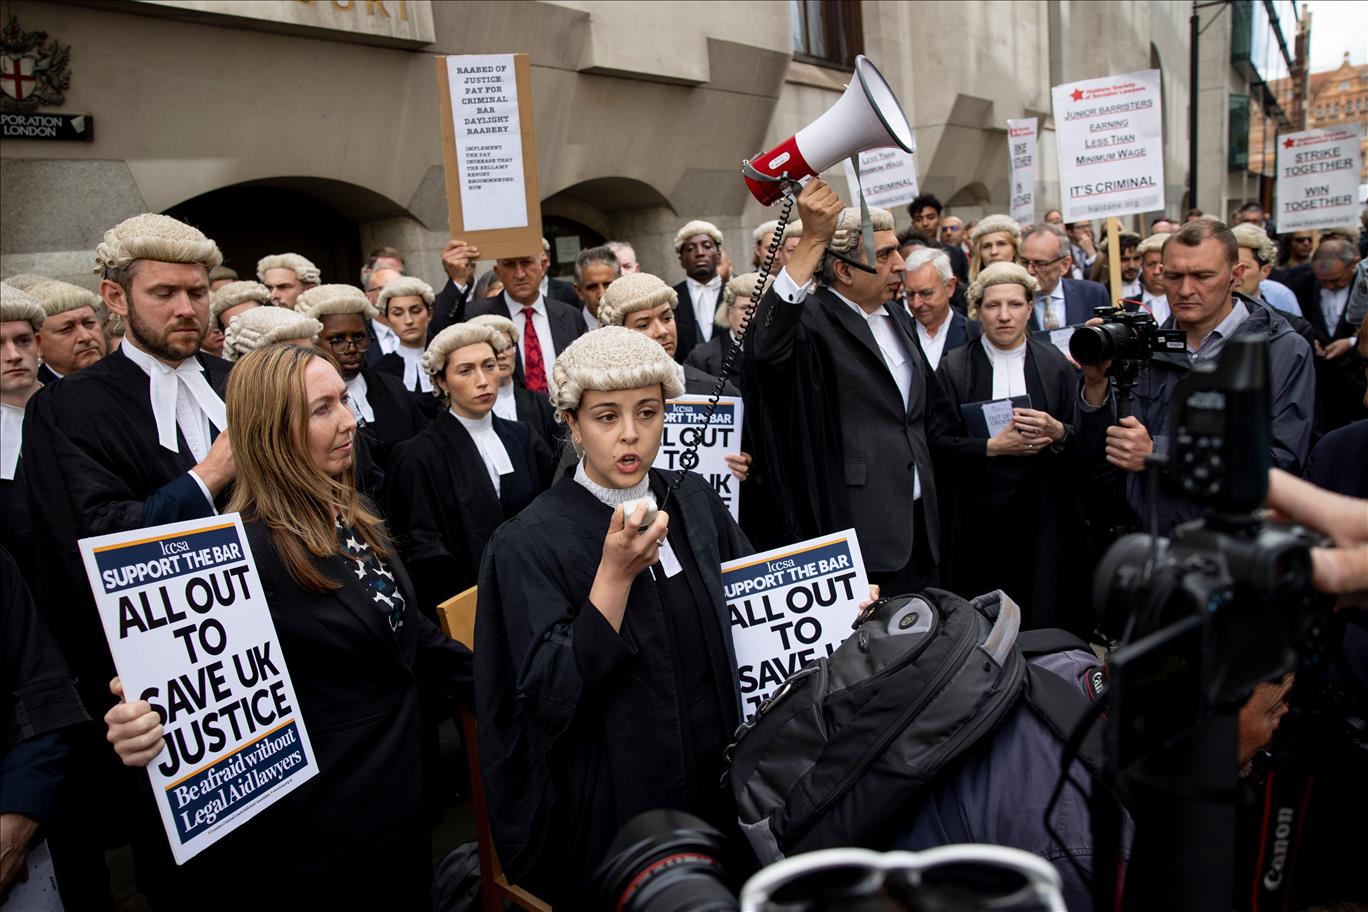 Barristers On Strike: Why Criminal Lawyers Are Walking Out  And What They Really Get Paid